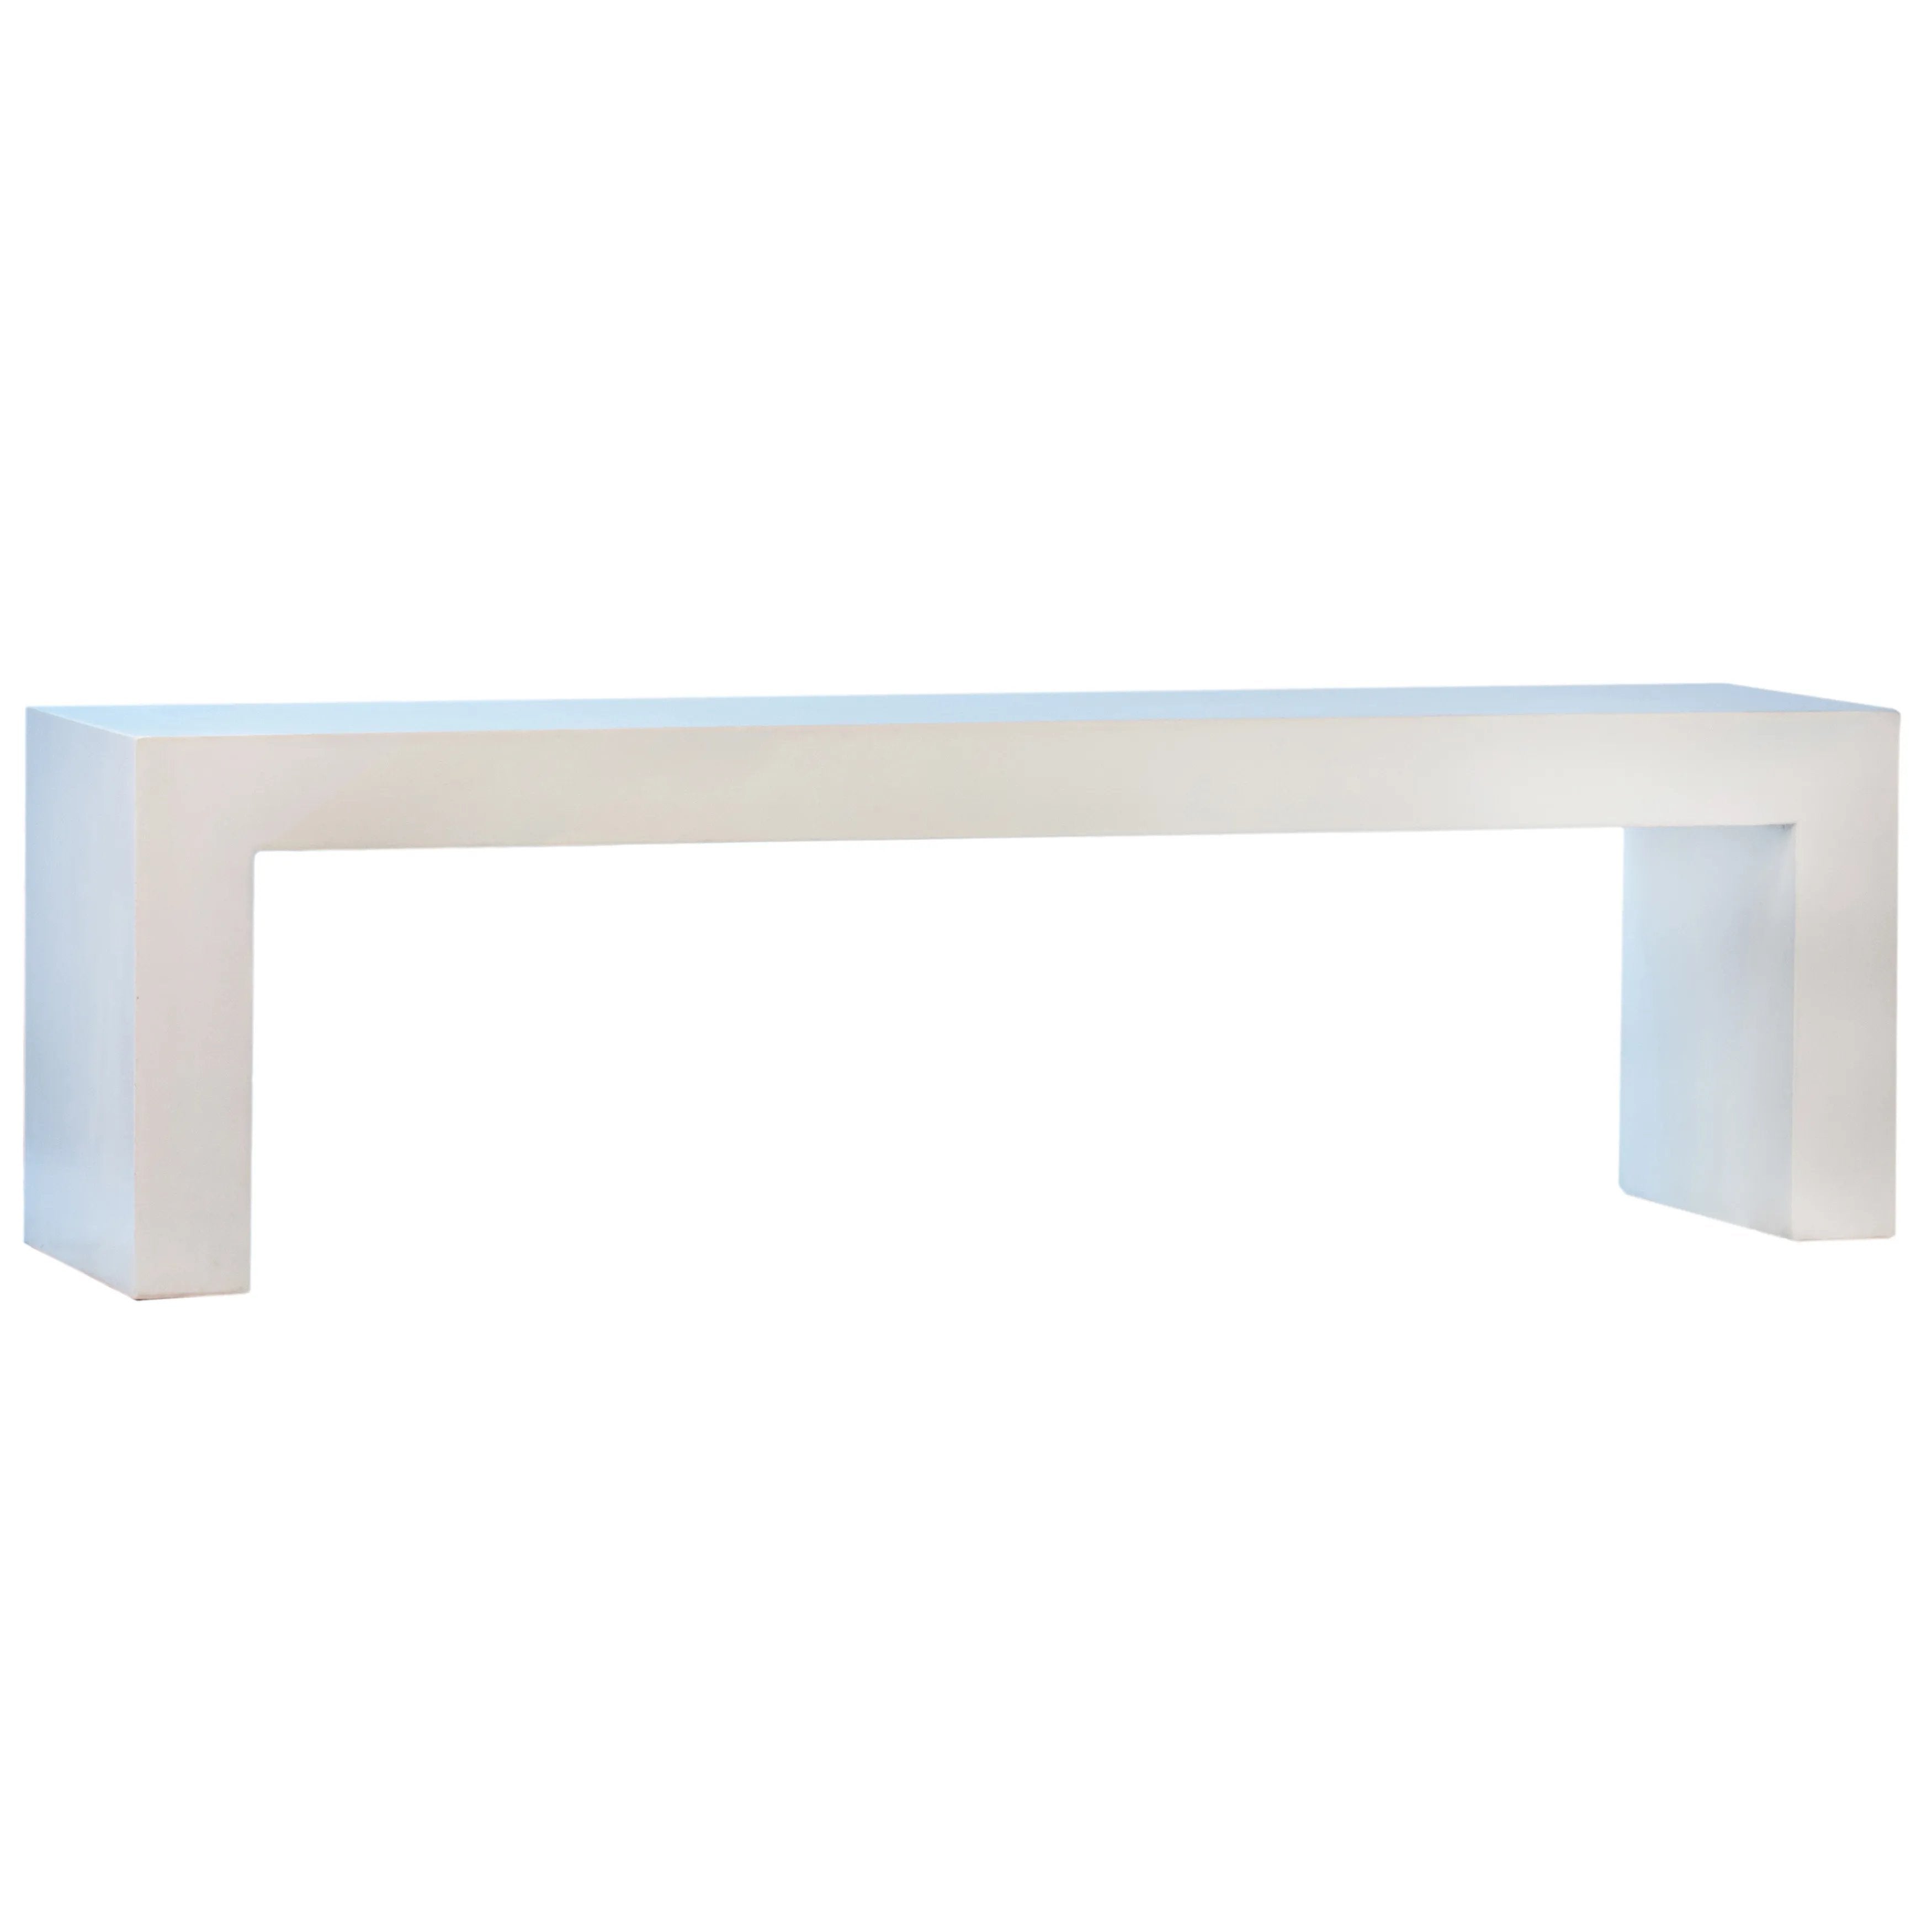 Suitable for both indoor and outdoor settings, this modern bench features a beautiful waterfall design. Naturally attractive and durable, measuring 63” in length, it is constructed with reinforced concrete. Featuring a white sealed finish, this three-seater bench is fresh and contemporary. Ideal as an entryway bench, dining bench, or patio bench. Amethyst Home provides interior design, new home construction design consulting, vintage area rugs, and lighting in the San Diego metro area.